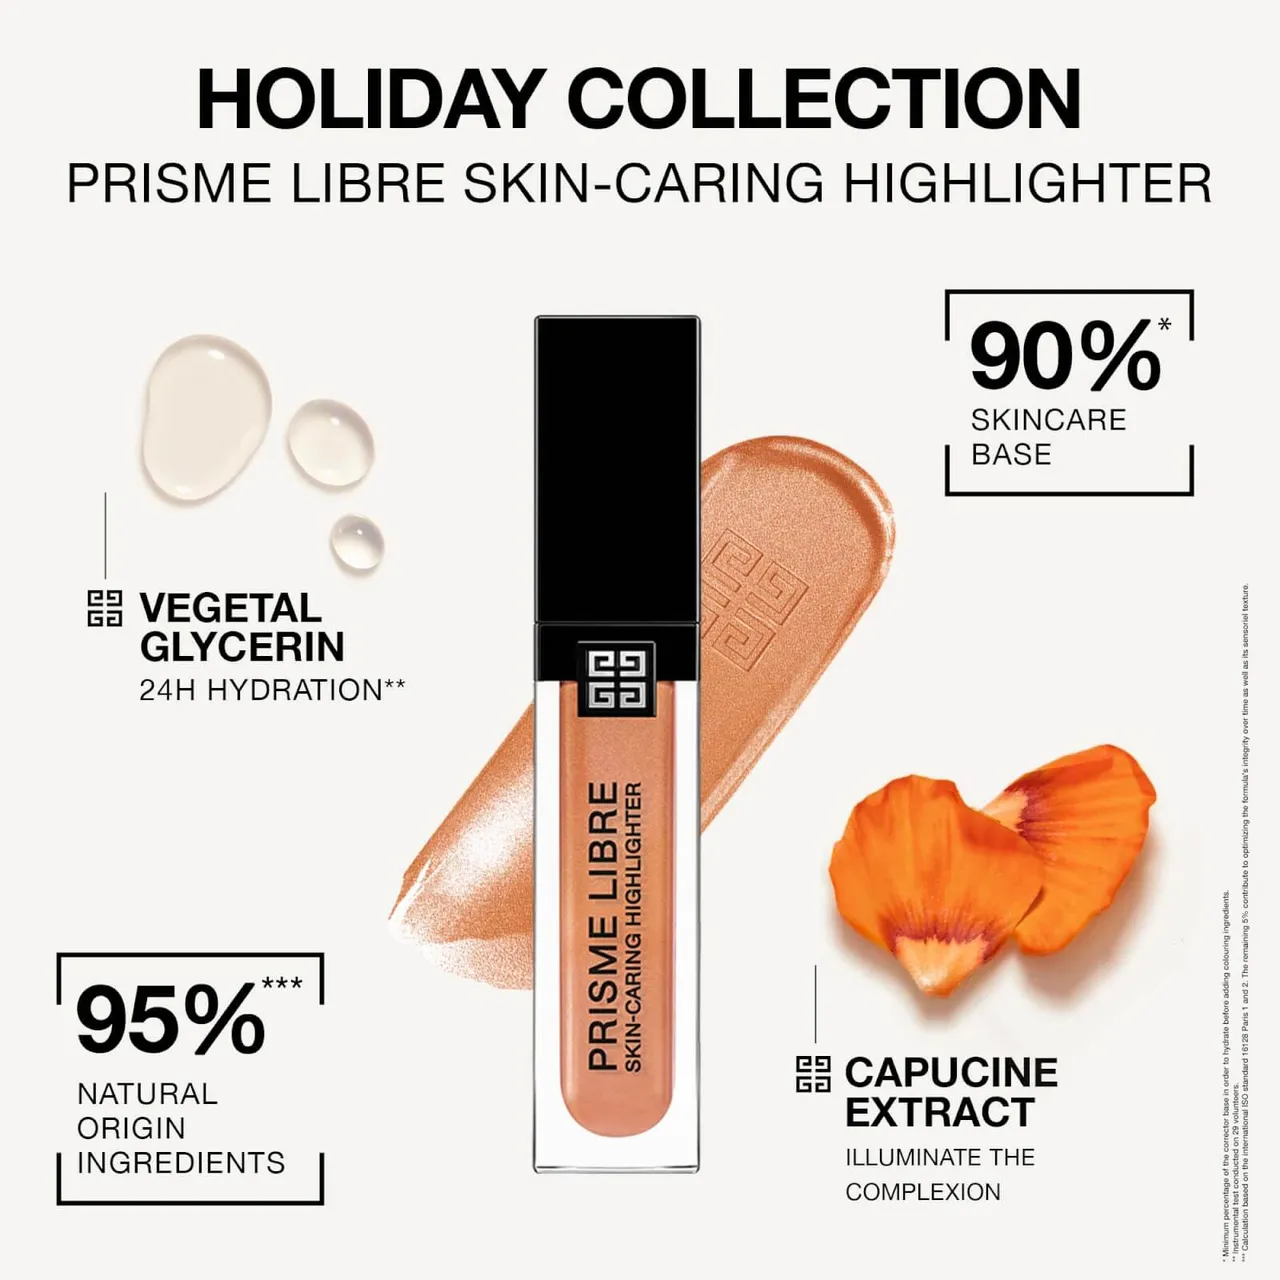 Givenchy Christmas Edition Prisme Libre Skin-Caring Highlighter - Bronze 11ml (Worth £37.00)